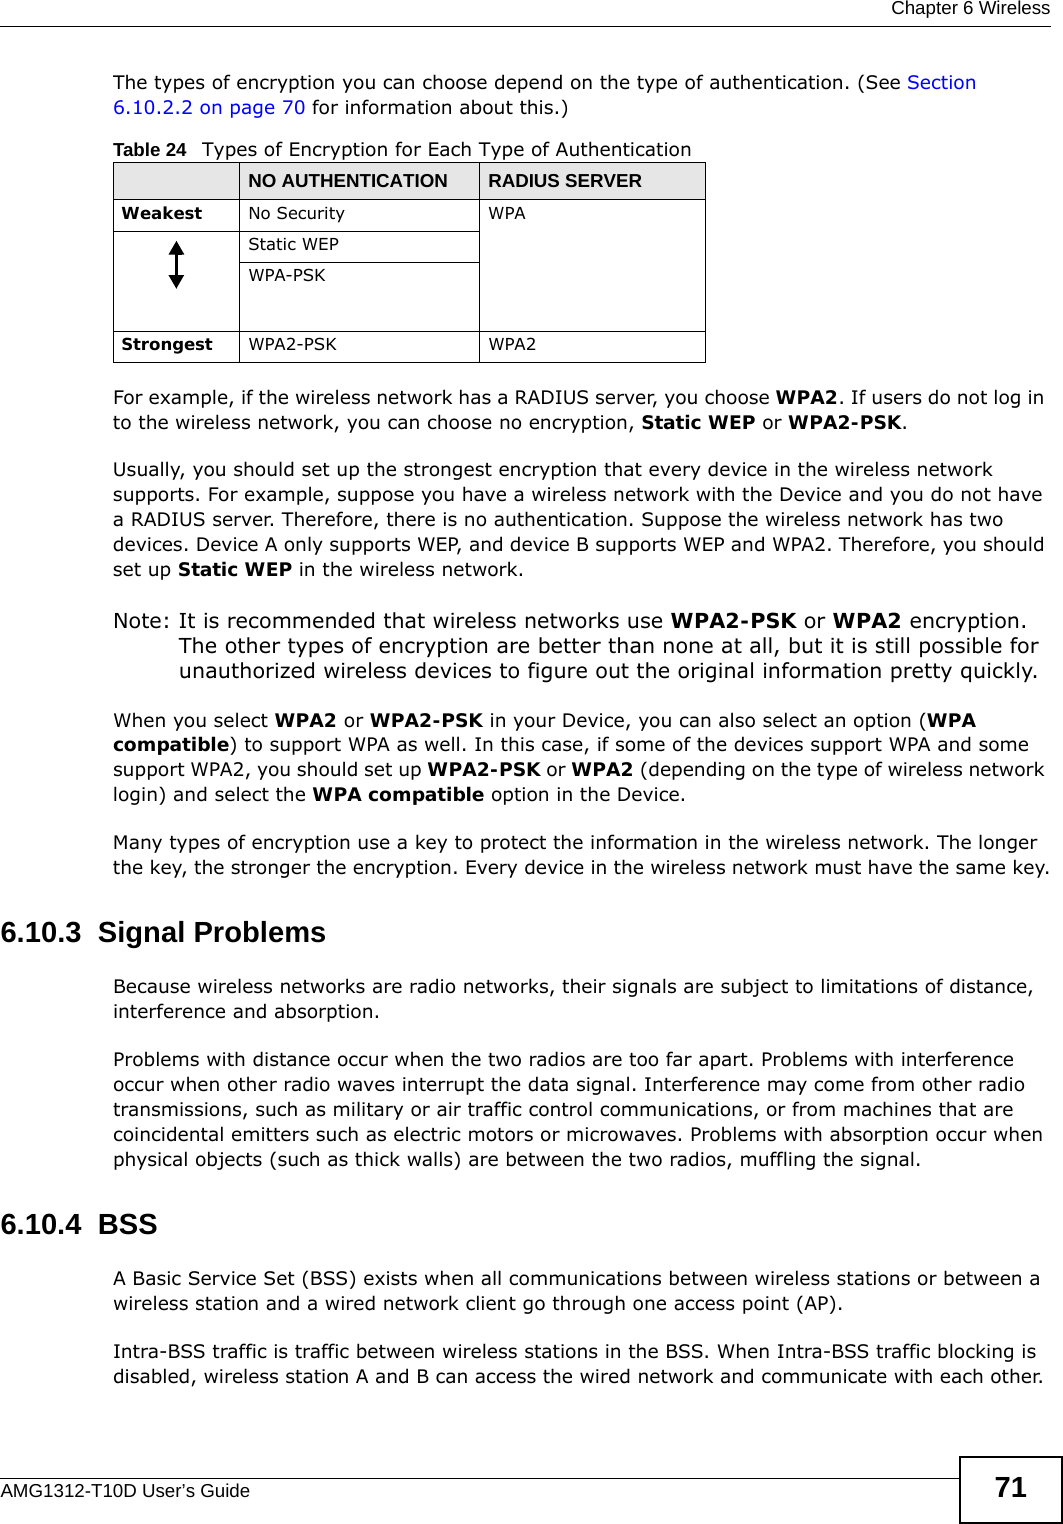  Chapter 6 WirelessAMG1312-T10D User’s Guide 71The types of encryption you can choose depend on the type of authentication. (See Section 6.10.2.2 on page 70 for information about this.)For example, if the wireless network has a RADIUS server, you choose WPA2. If users do not log in to the wireless network, you can choose no encryption, Static WEP or WPA2-PSK.Usually, you should set up the strongest encryption that every device in the wireless network supports. For example, suppose you have a wireless network with the Device and you do not have a RADIUS server. Therefore, there is no authentication. Suppose the wireless network has two devices. Device A only supports WEP, and device B supports WEP and WPA2. Therefore, you should set up Static WEP in the wireless network.Note: It is recommended that wireless networks use WPA2-PSK or WPA2 encryption. The other types of encryption are better than none at all, but it is still possible for unauthorized wireless devices to figure out the original information pretty quickly.When you select WPA2 or WPA2-PSK in your Device, you can also select an option (WPA compatible) to support WPA as well. In this case, if some of the devices support WPA and some support WPA2, you should set up WPA2-PSK or WPA2 (depending on the type of wireless network login) and select the WPA compatible option in the Device.Many types of encryption use a key to protect the information in the wireless network. The longer the key, the stronger the encryption. Every device in the wireless network must have the same key.6.10.3  Signal ProblemsBecause wireless networks are radio networks, their signals are subject to limitations of distance, interference and absorption.Problems with distance occur when the two radios are too far apart. Problems with interference occur when other radio waves interrupt the data signal. Interference may come from other radio transmissions, such as military or air traffic control communications, or from machines that are coincidental emitters such as electric motors or microwaves. Problems with absorption occur when physical objects (such as thick walls) are between the two radios, muffling the signal.6.10.4  BSSA Basic Service Set (BSS) exists when all communications between wireless stations or between a wireless station and a wired network client go through one access point (AP). Intra-BSS traffic is traffic between wireless stations in the BSS. When Intra-BSS traffic blocking is disabled, wireless station A and B can access the wired network and communicate with each other. Table 24   Types of Encryption for Each Type of AuthenticationNO AUTHENTICATION RADIUS SERVERWeakest No Security WPAStatic WEPWPA-PSKStrongest WPA2-PSK WPA2